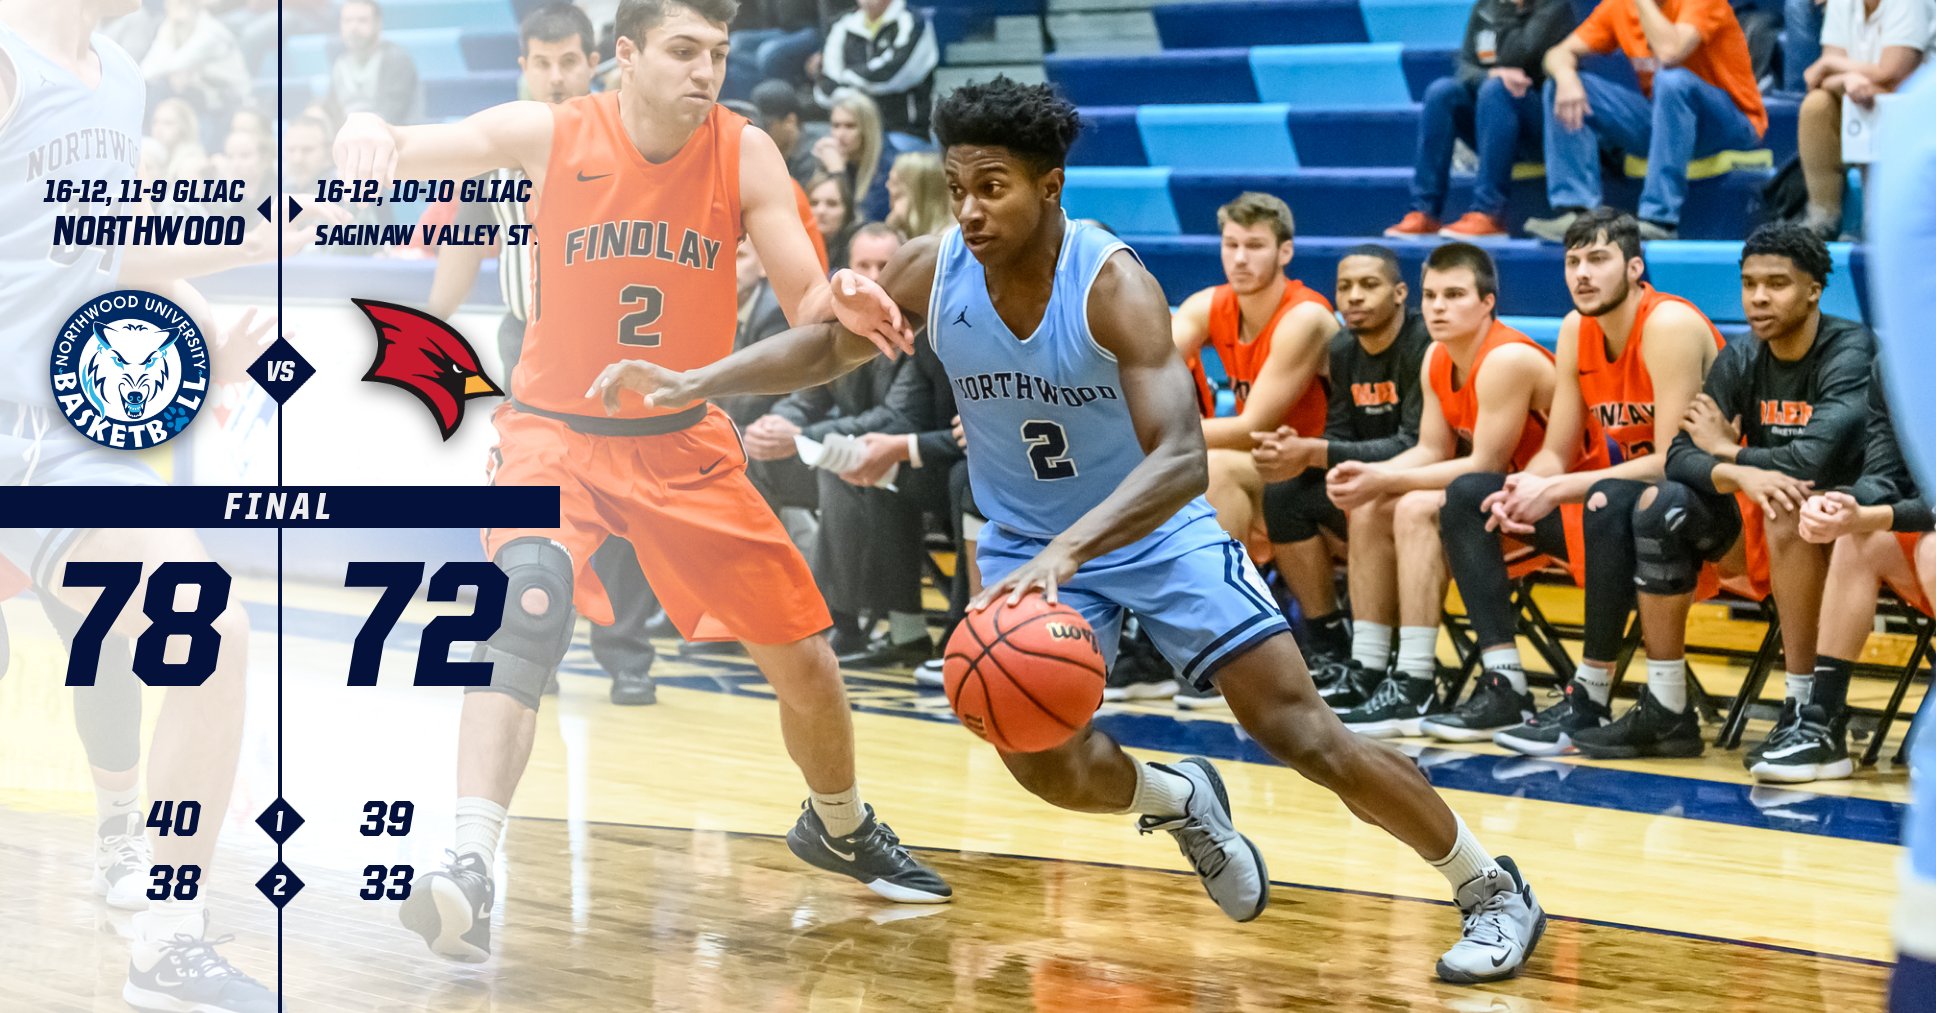 Men's Basketball Clinches Home GLIAC Tournament Game With 78-72 Win At Saginaw Valley